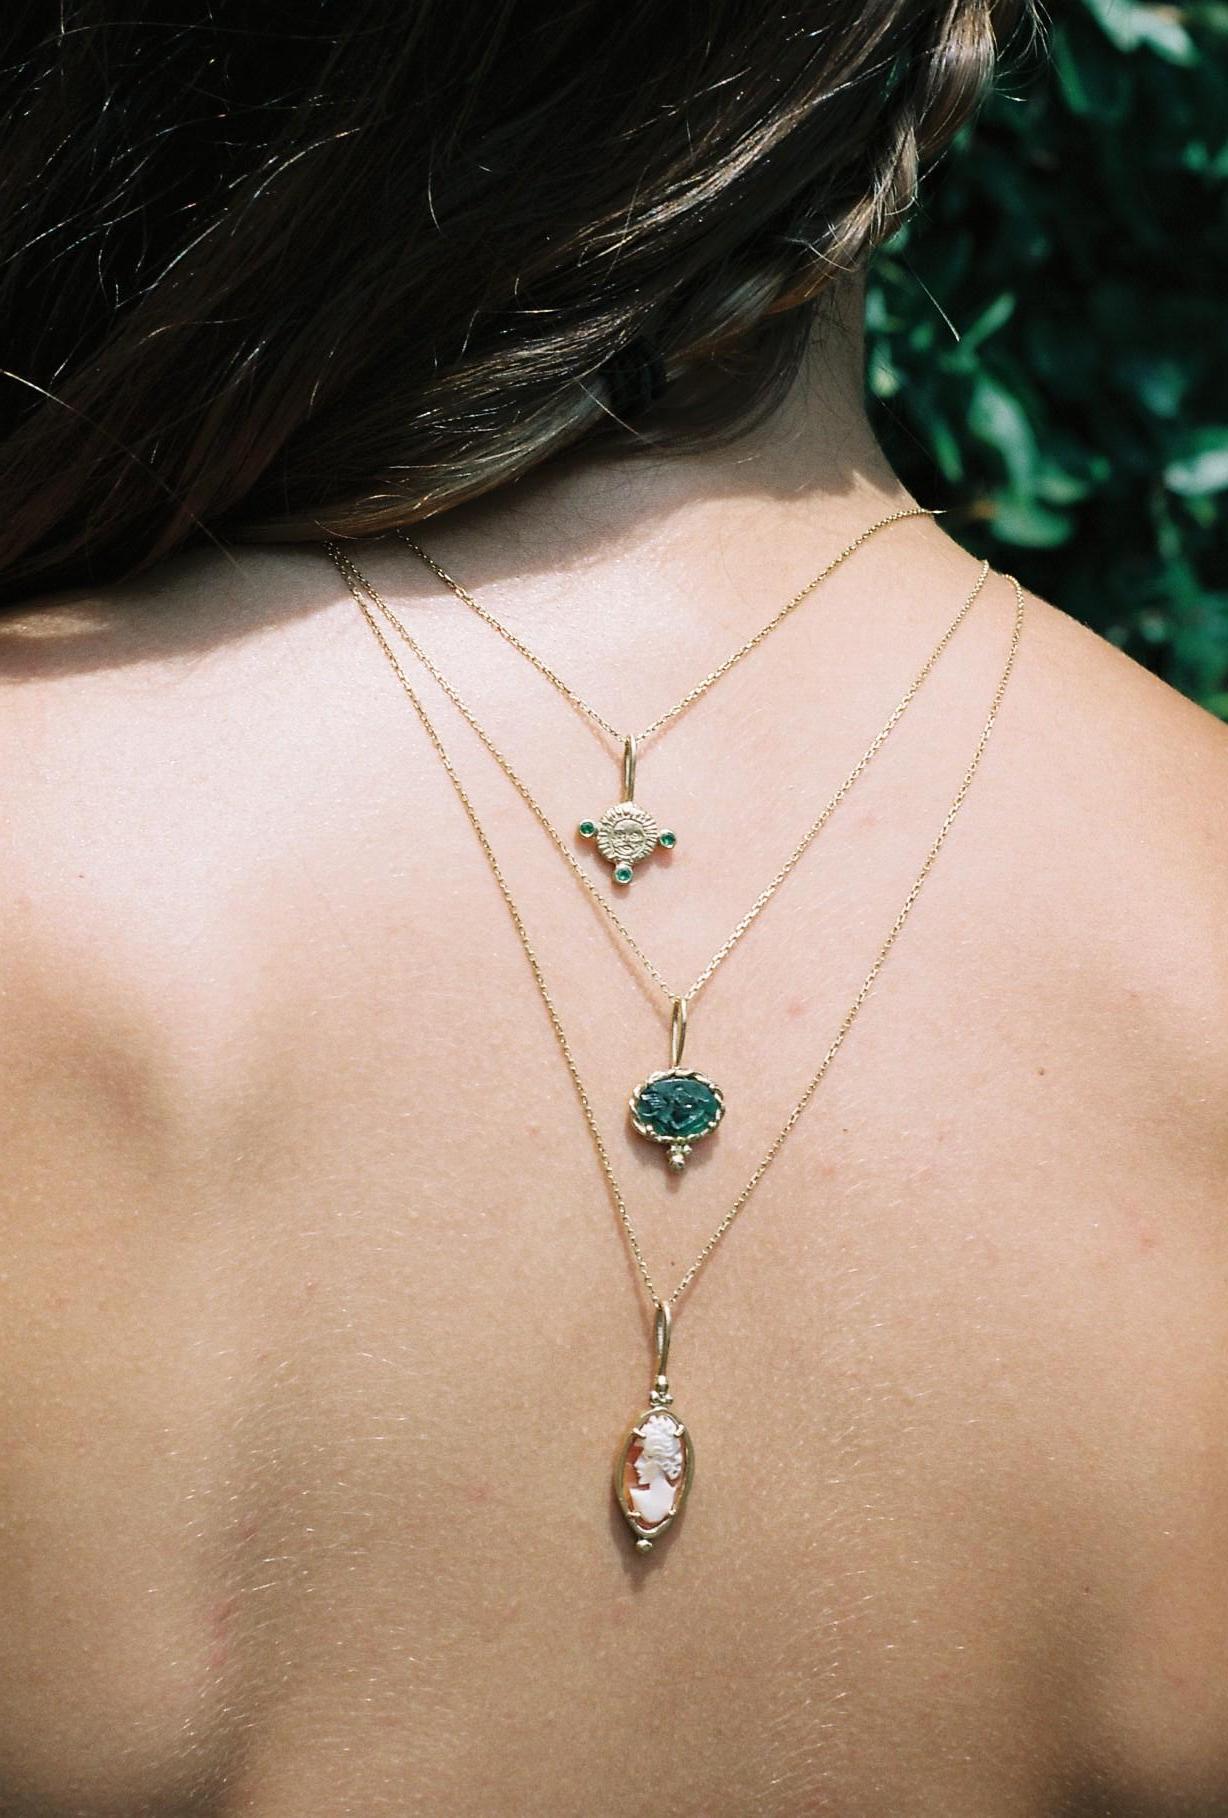 Brilliant Cut March Birthstone Pendant Necklace with Aquamarine, 18 Karat Yellow Gold For Sale